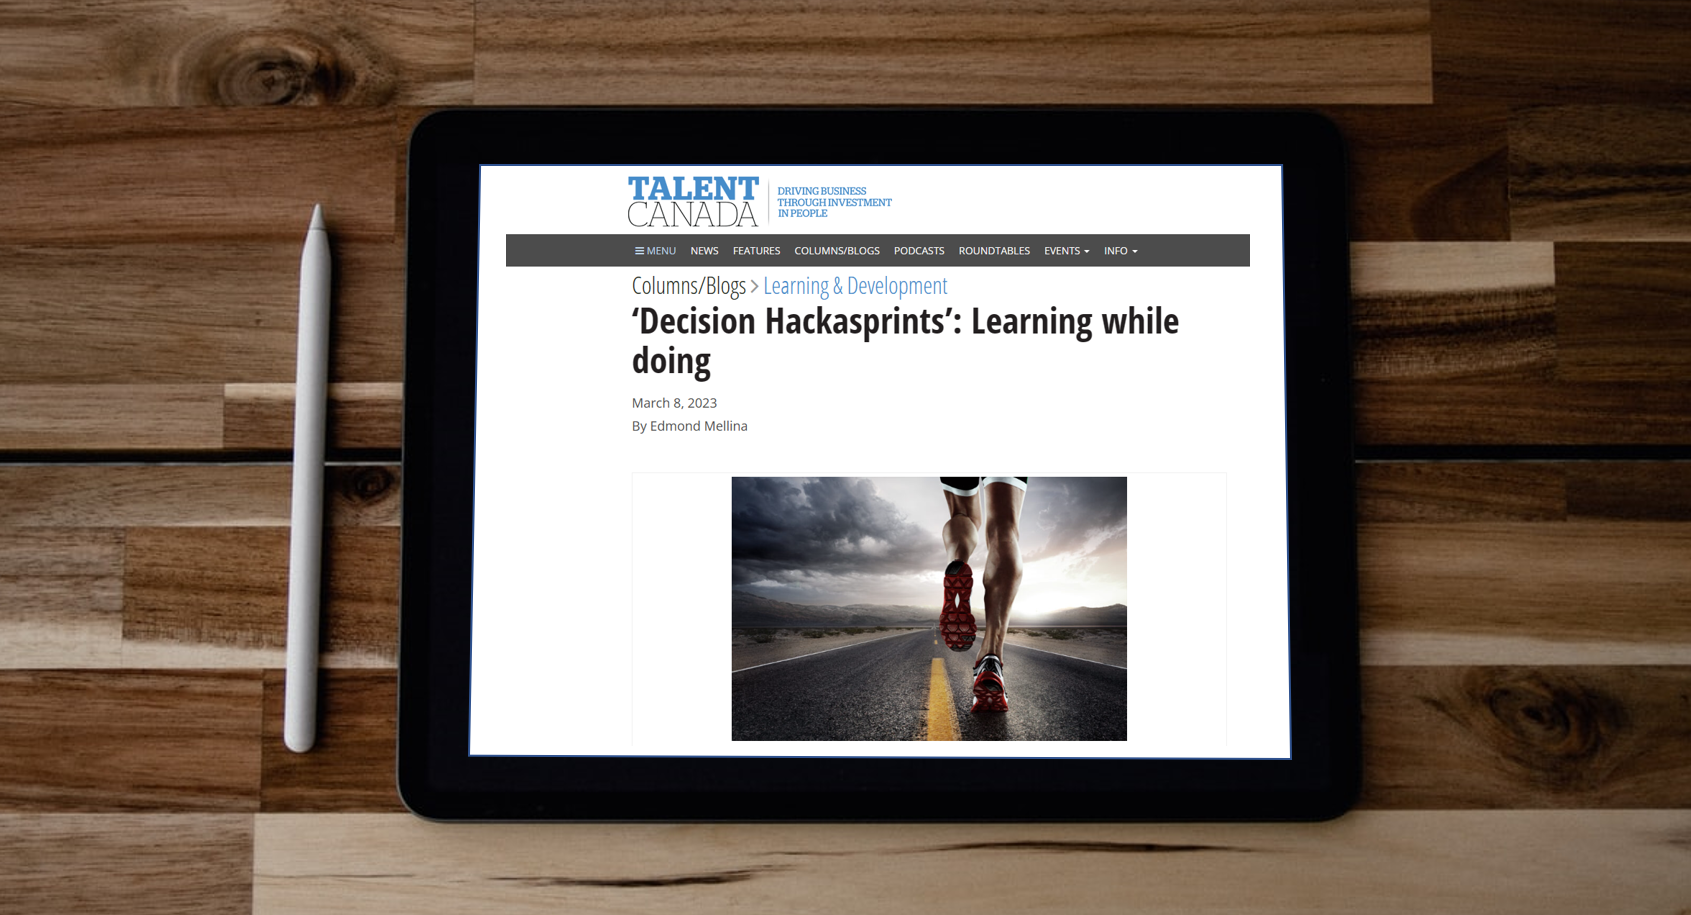 Published article Talent Canada 2023-Mar-08: ‘Decision Hackasprints’: Learning while doing